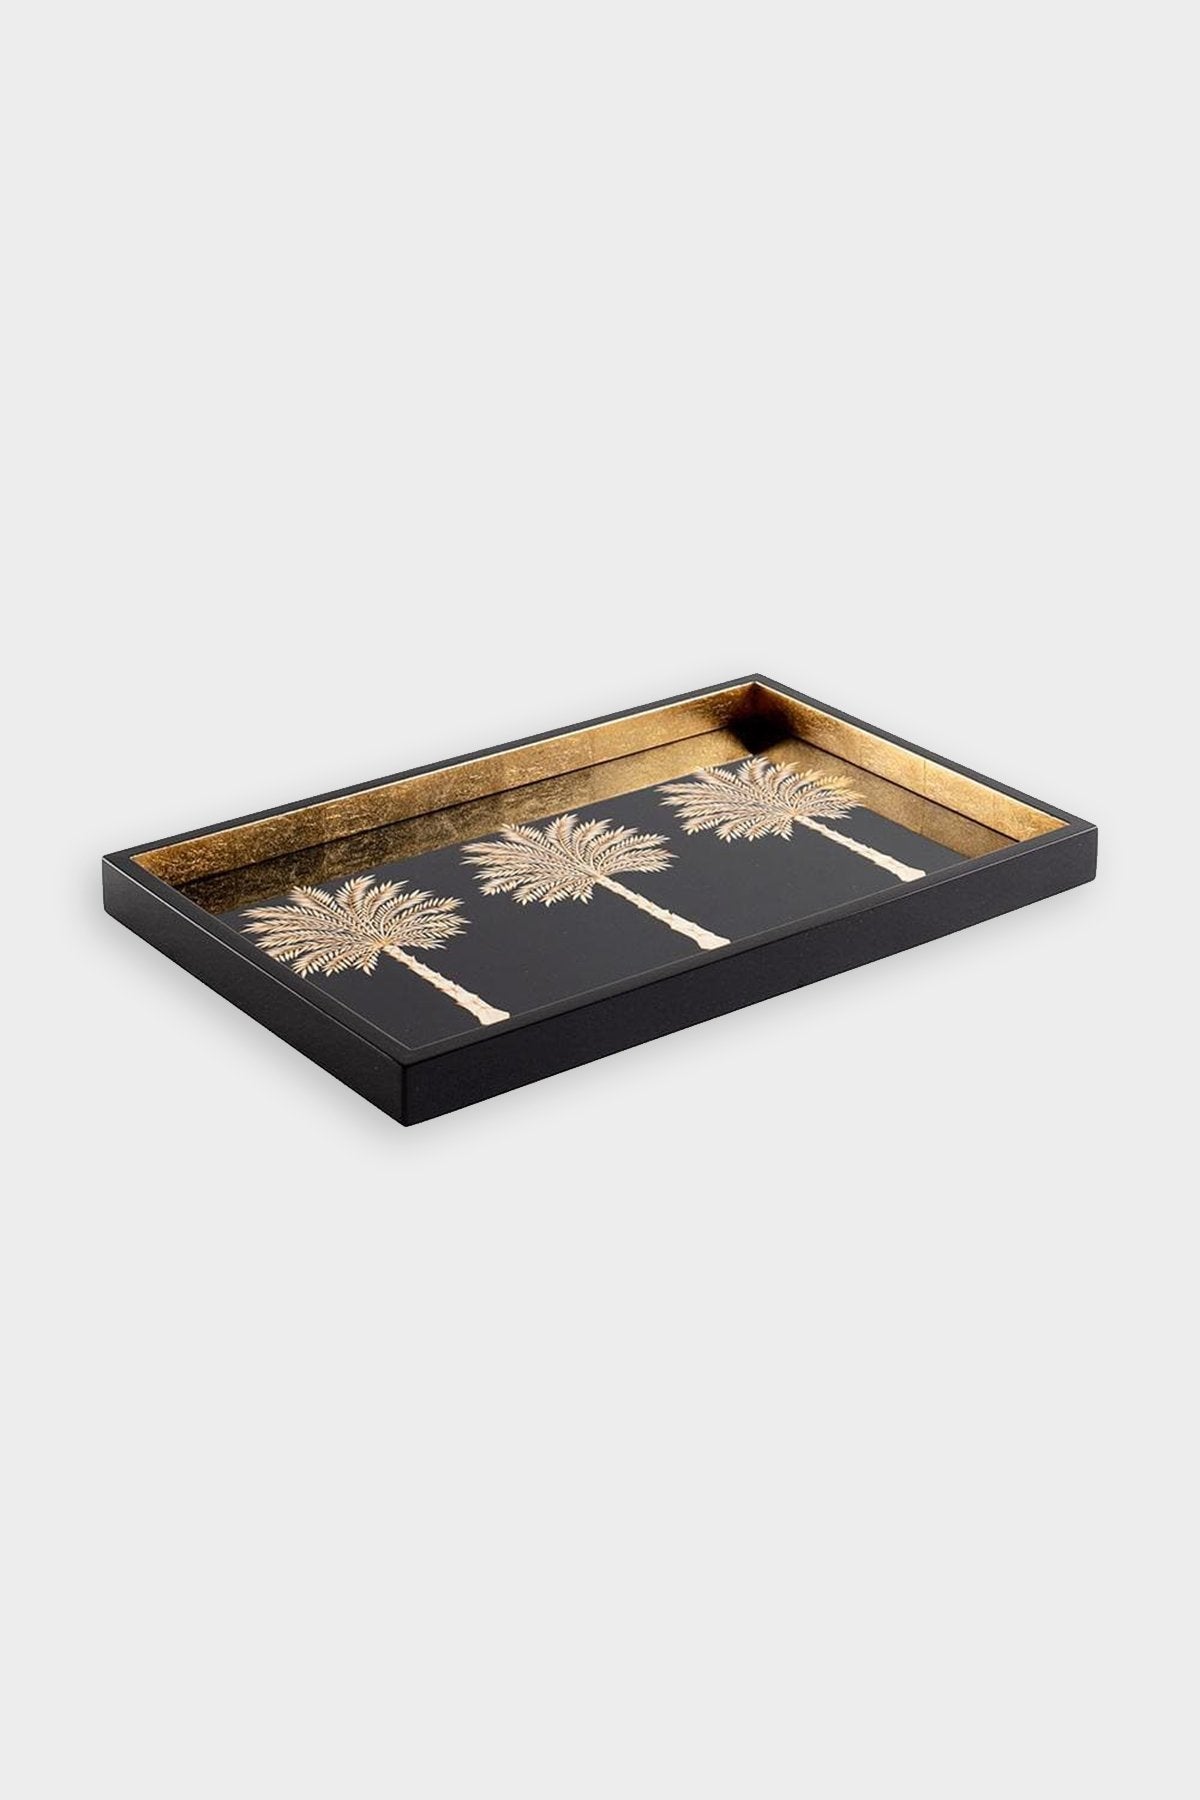 Grand Palms Lacquer Vanity Tray in Black - shop-olivia.com